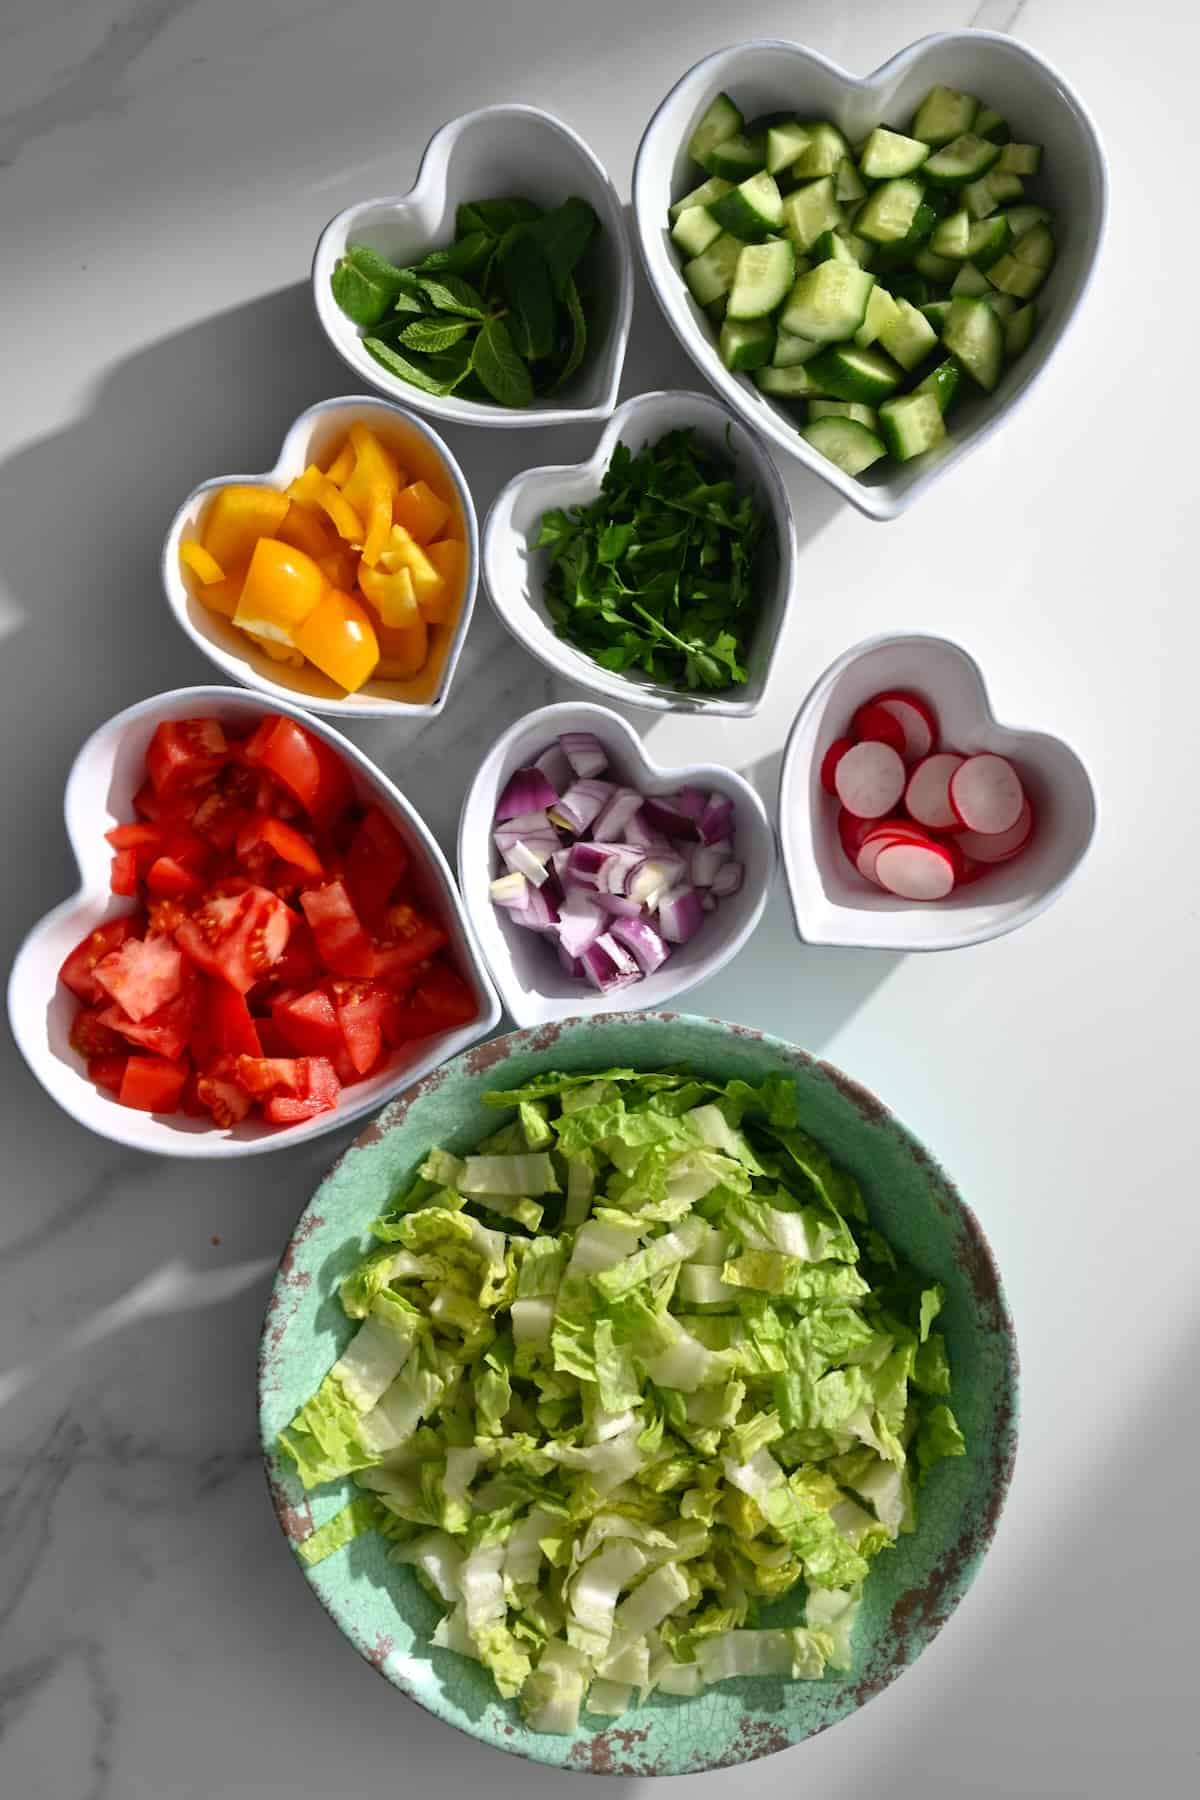 Chopped vegetables for fattoush salad